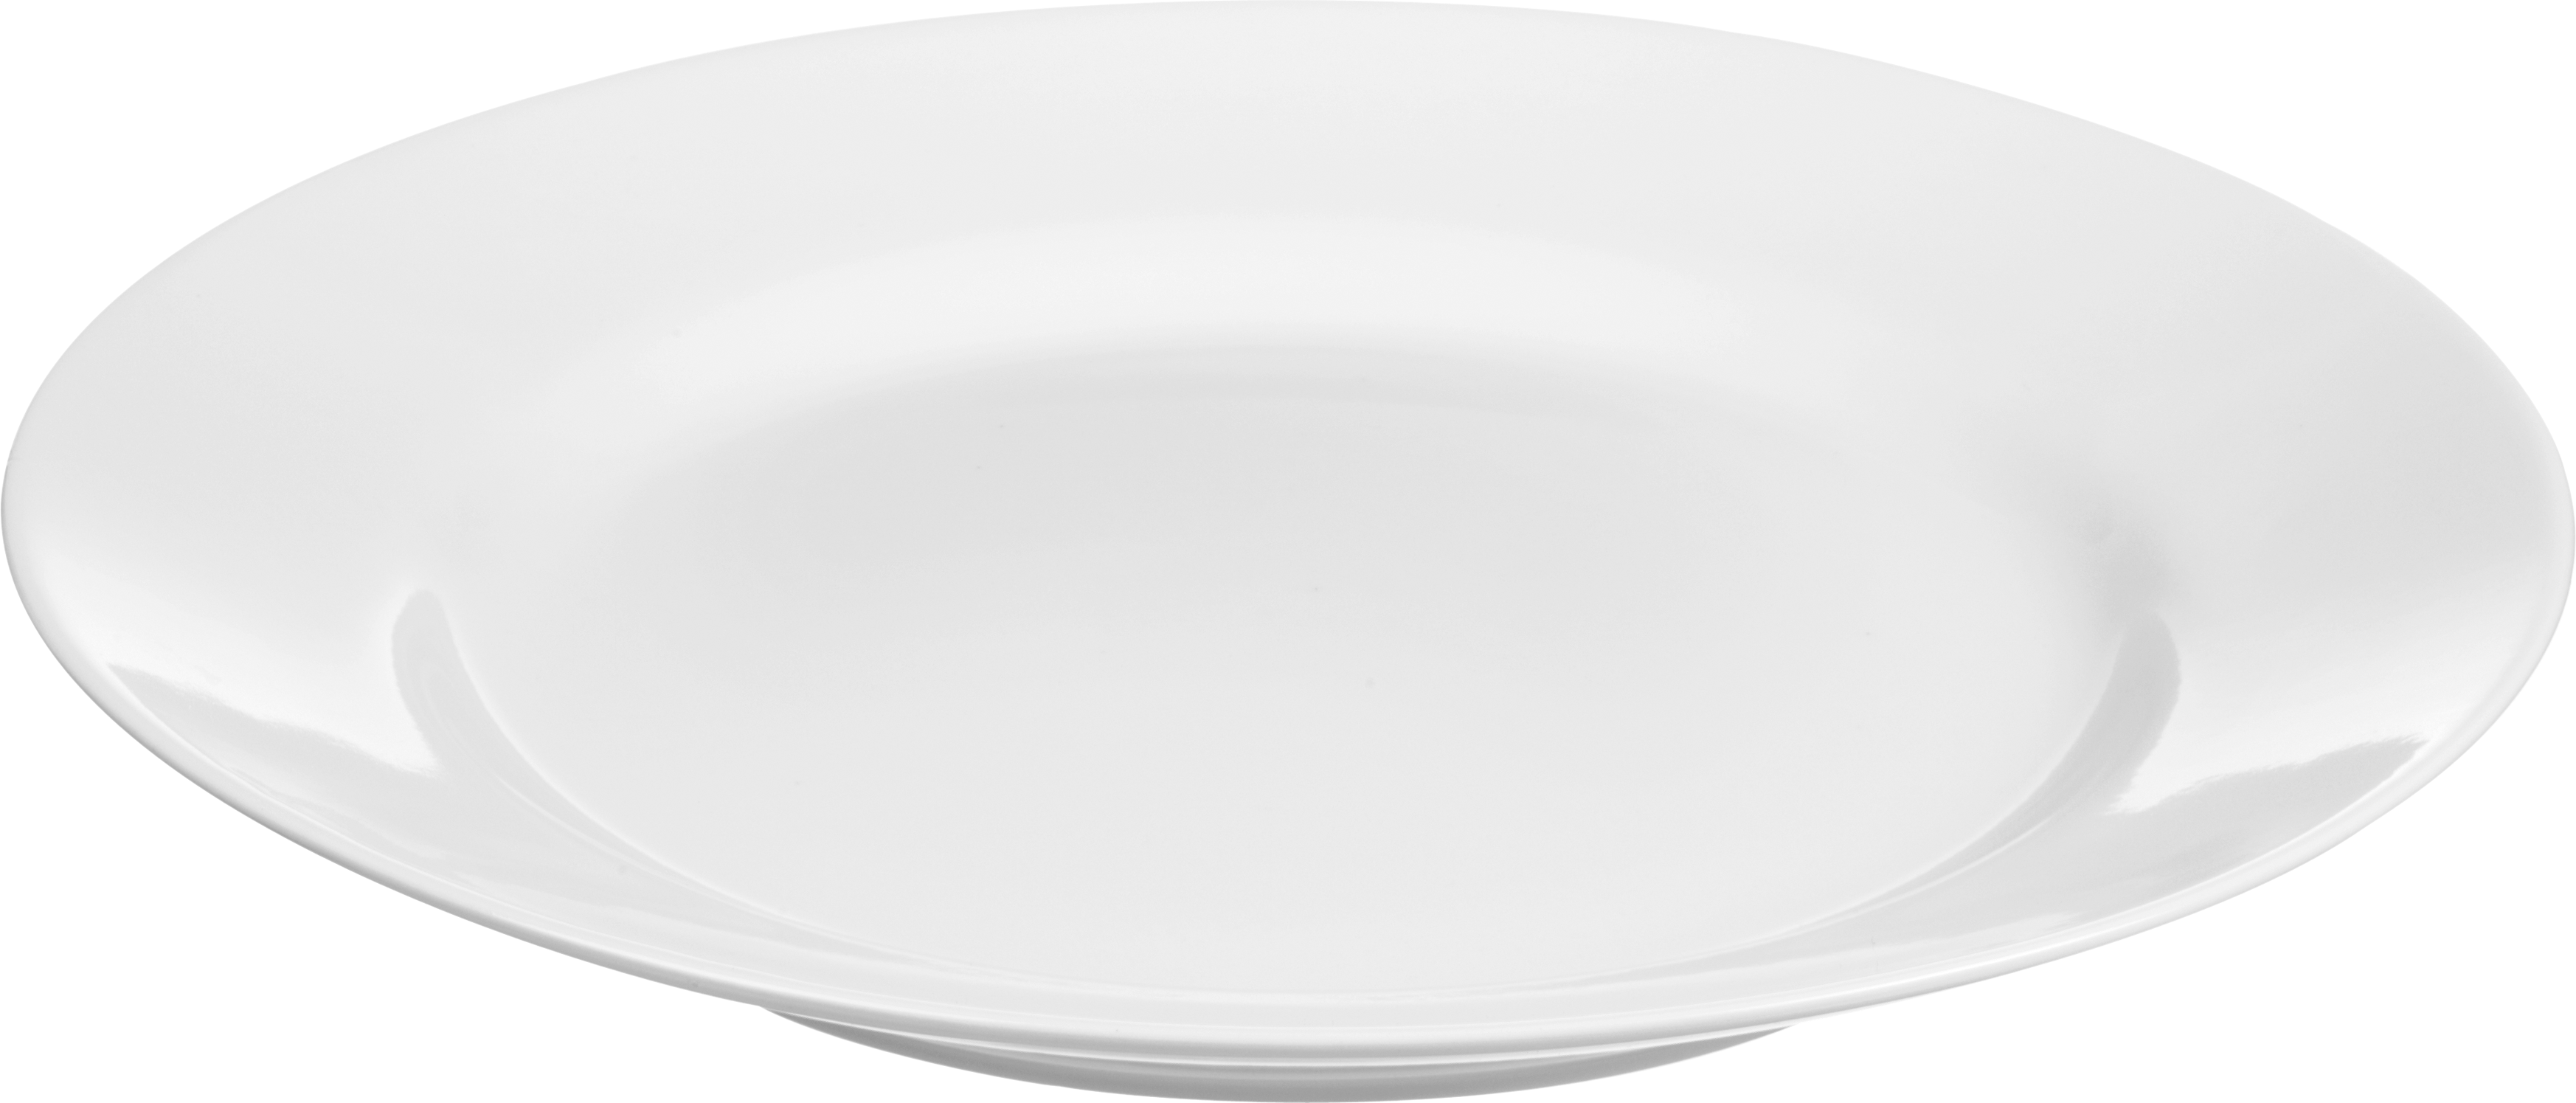 White Plate Png Image - Plate, Transparent background PNG HD thumbnail